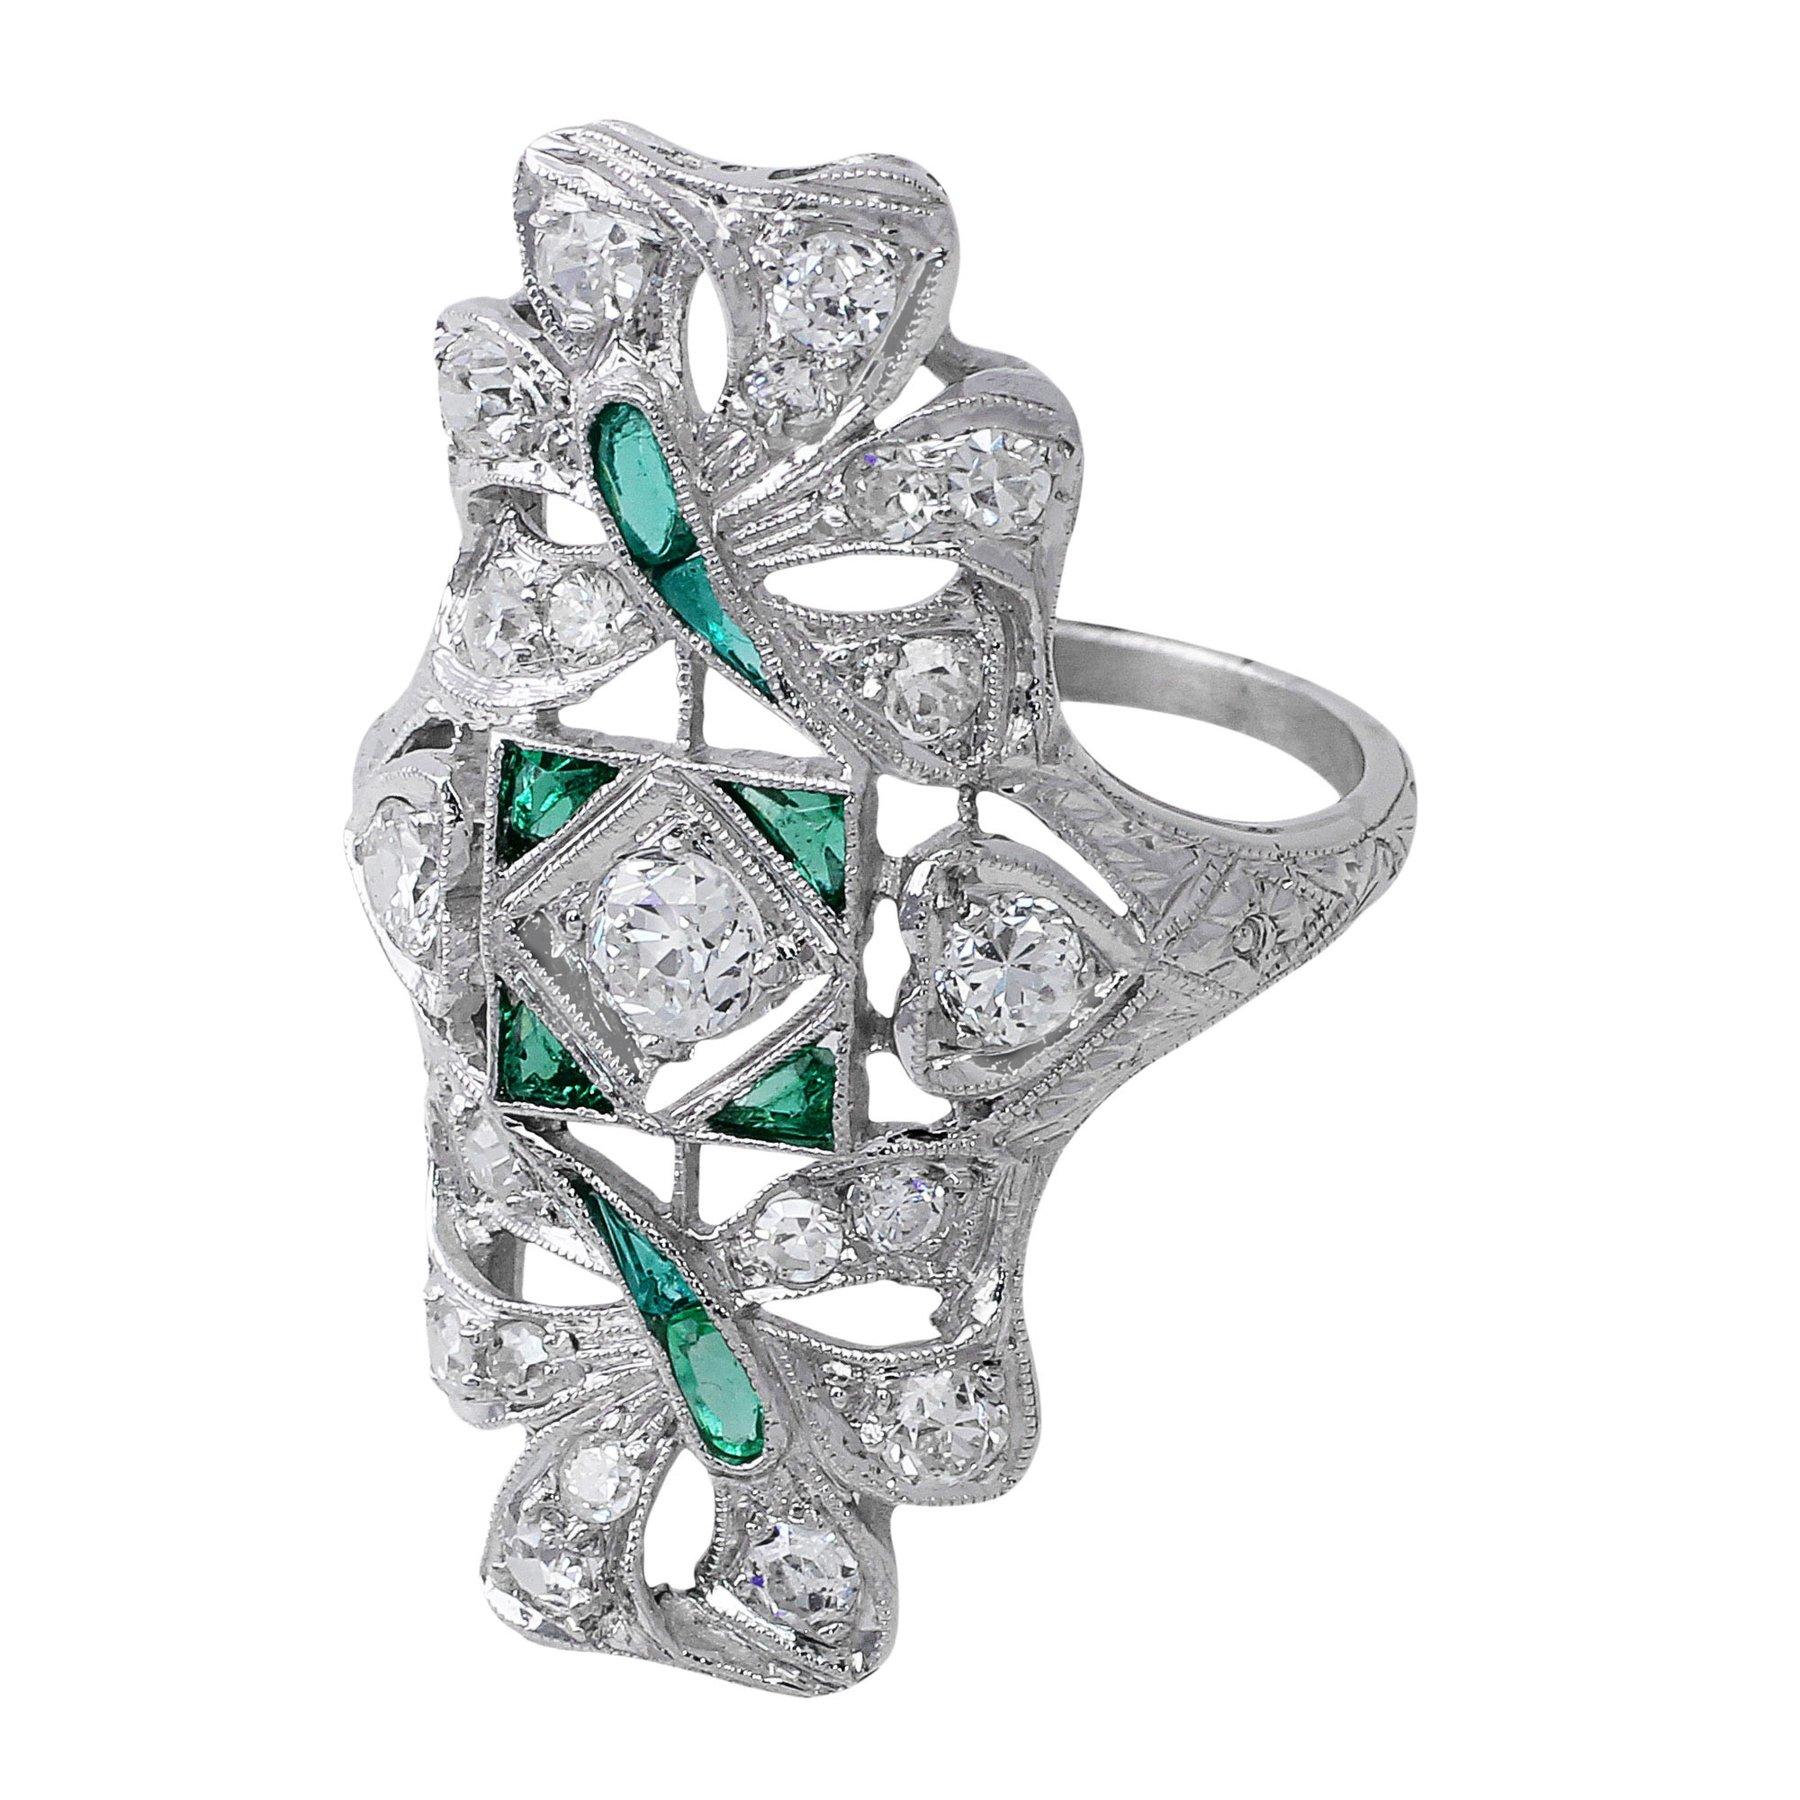 Estate Emerald and Diamond Panel Ring. Platinum ring with 21 round brilliant cut diamonds totaling approximately 1ct and 8 emeralds totaling approximately 0.25cts.